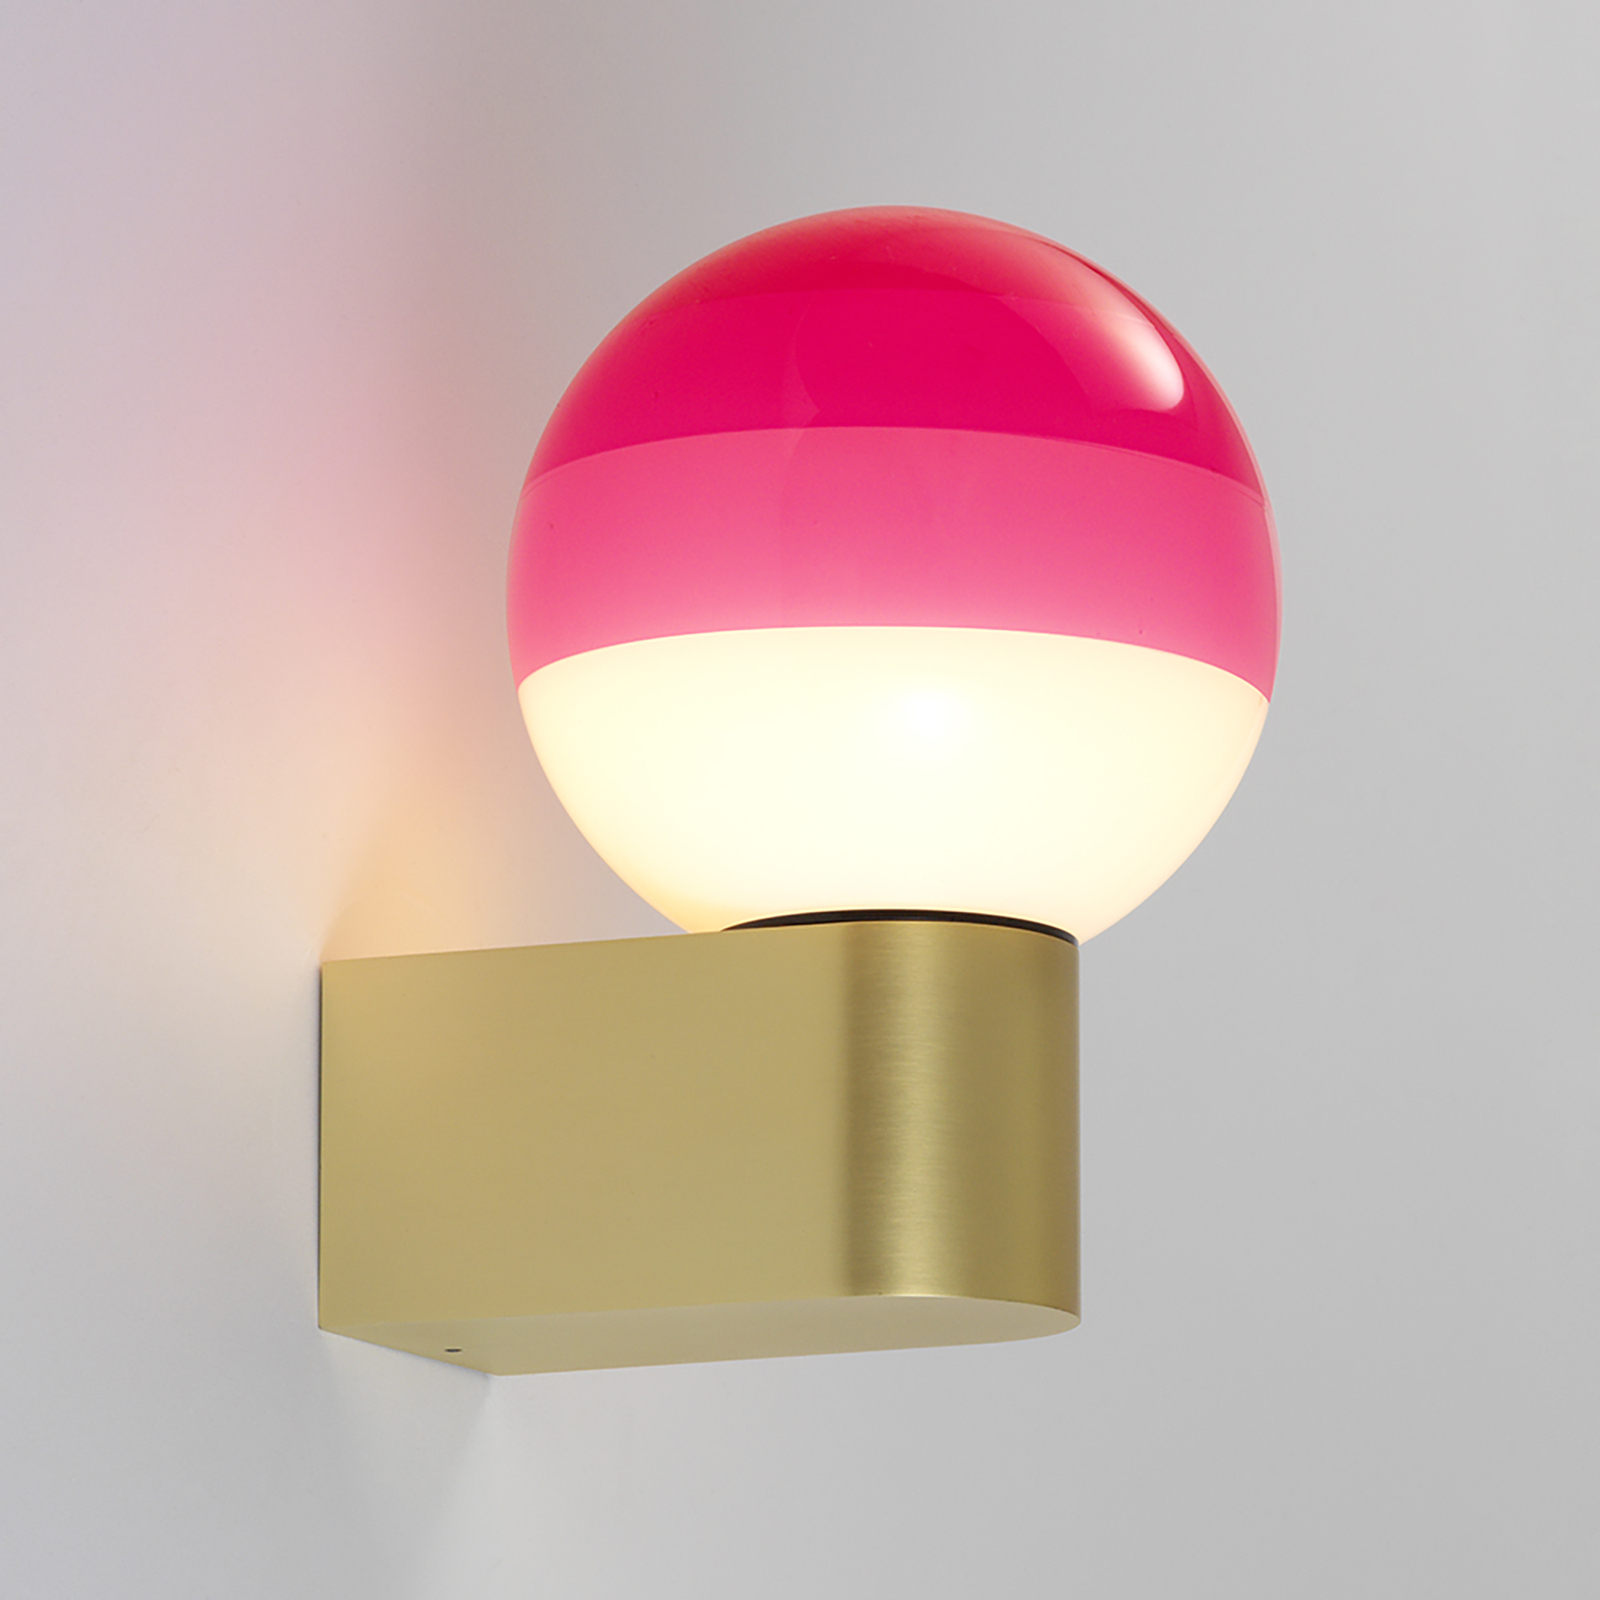 MARSET Dipping Light A1 LED wall lamp, pink/gold